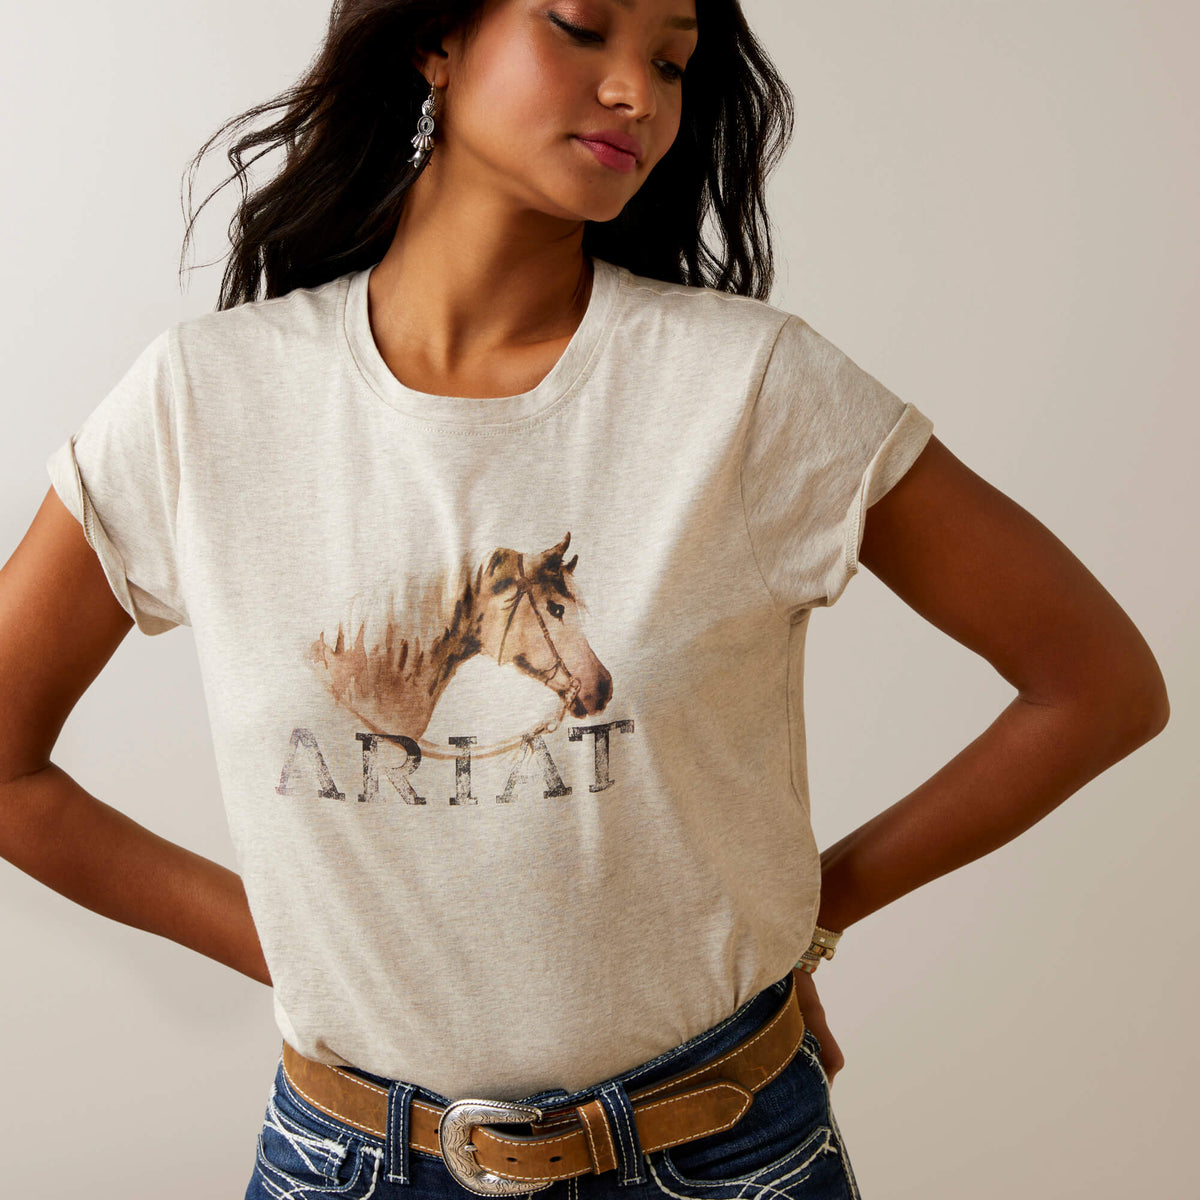 Ariat Women's Caballo Oatmeal Heather Graphic Tee (Available in Regular and Plus Sizes)